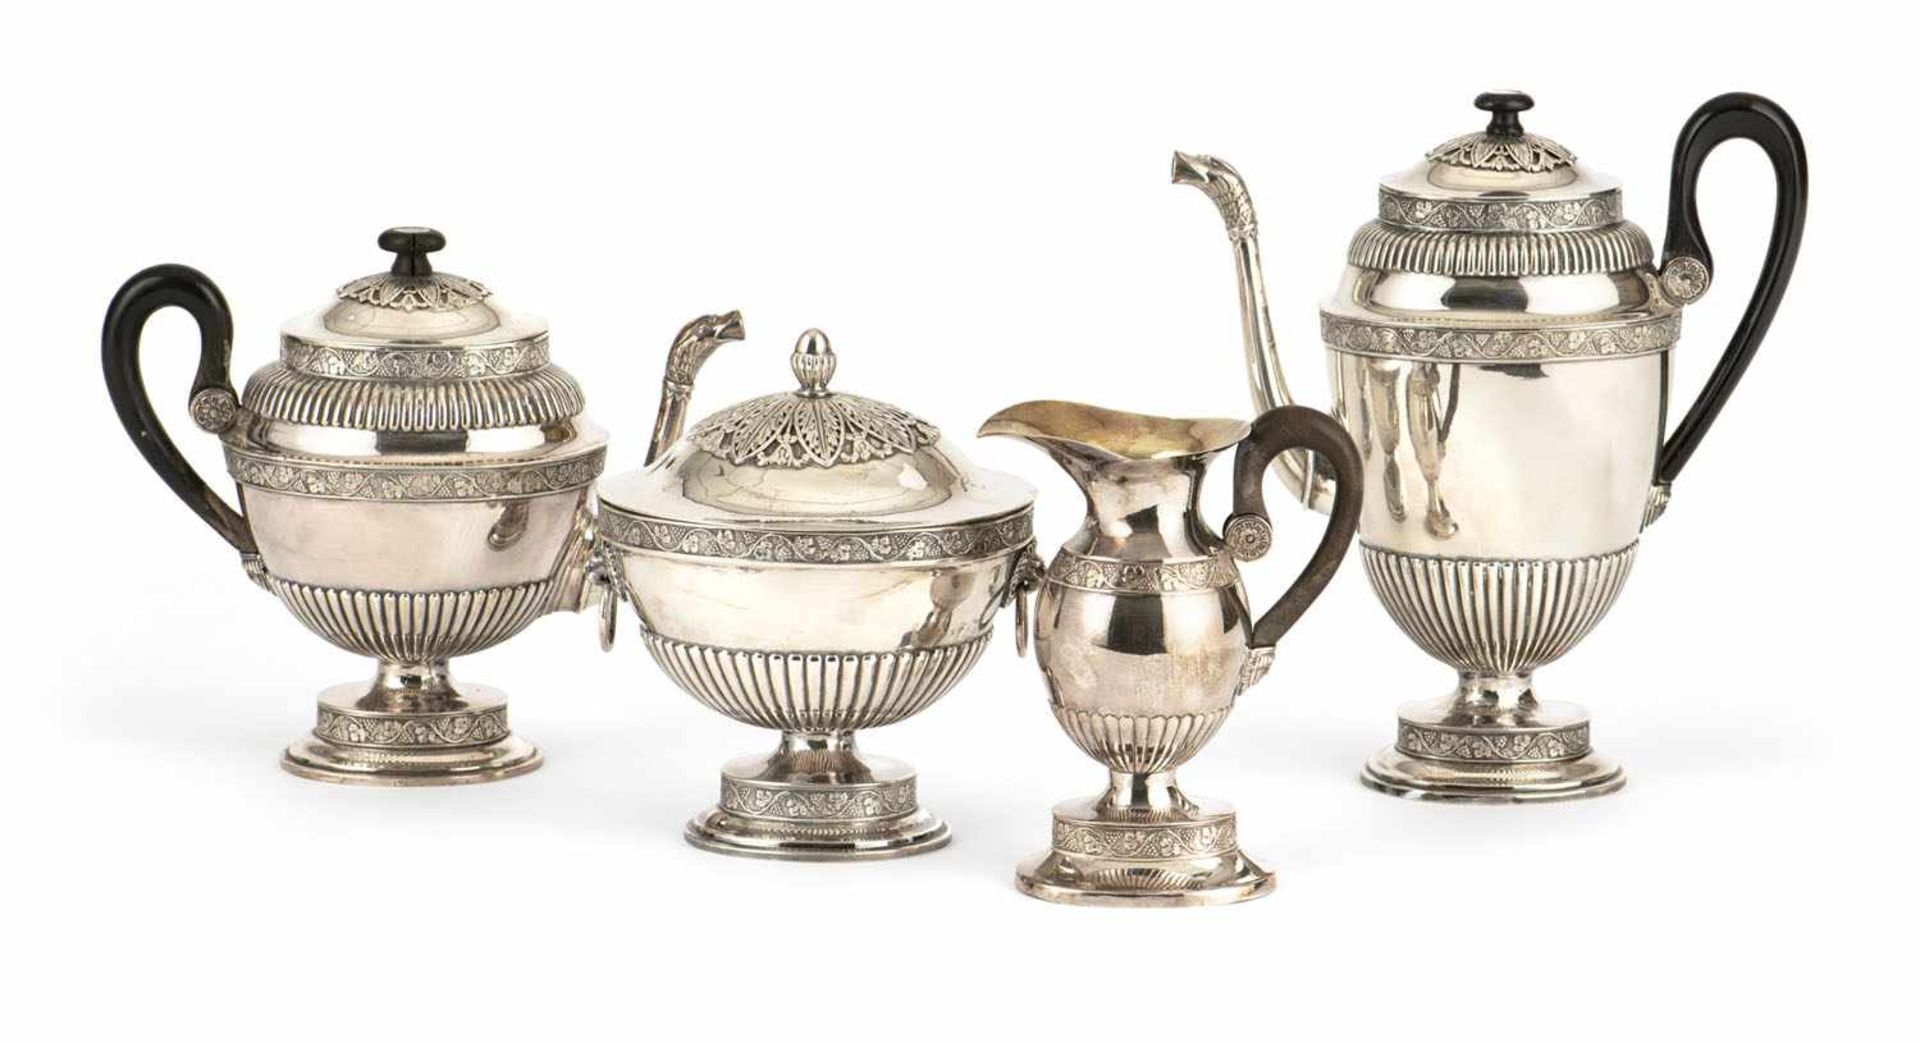 NEOCLASSICAL RUSSIAN COFFEE AND TEA SILVER SERVICE, comprising coffeepot, teapot, milkpot and